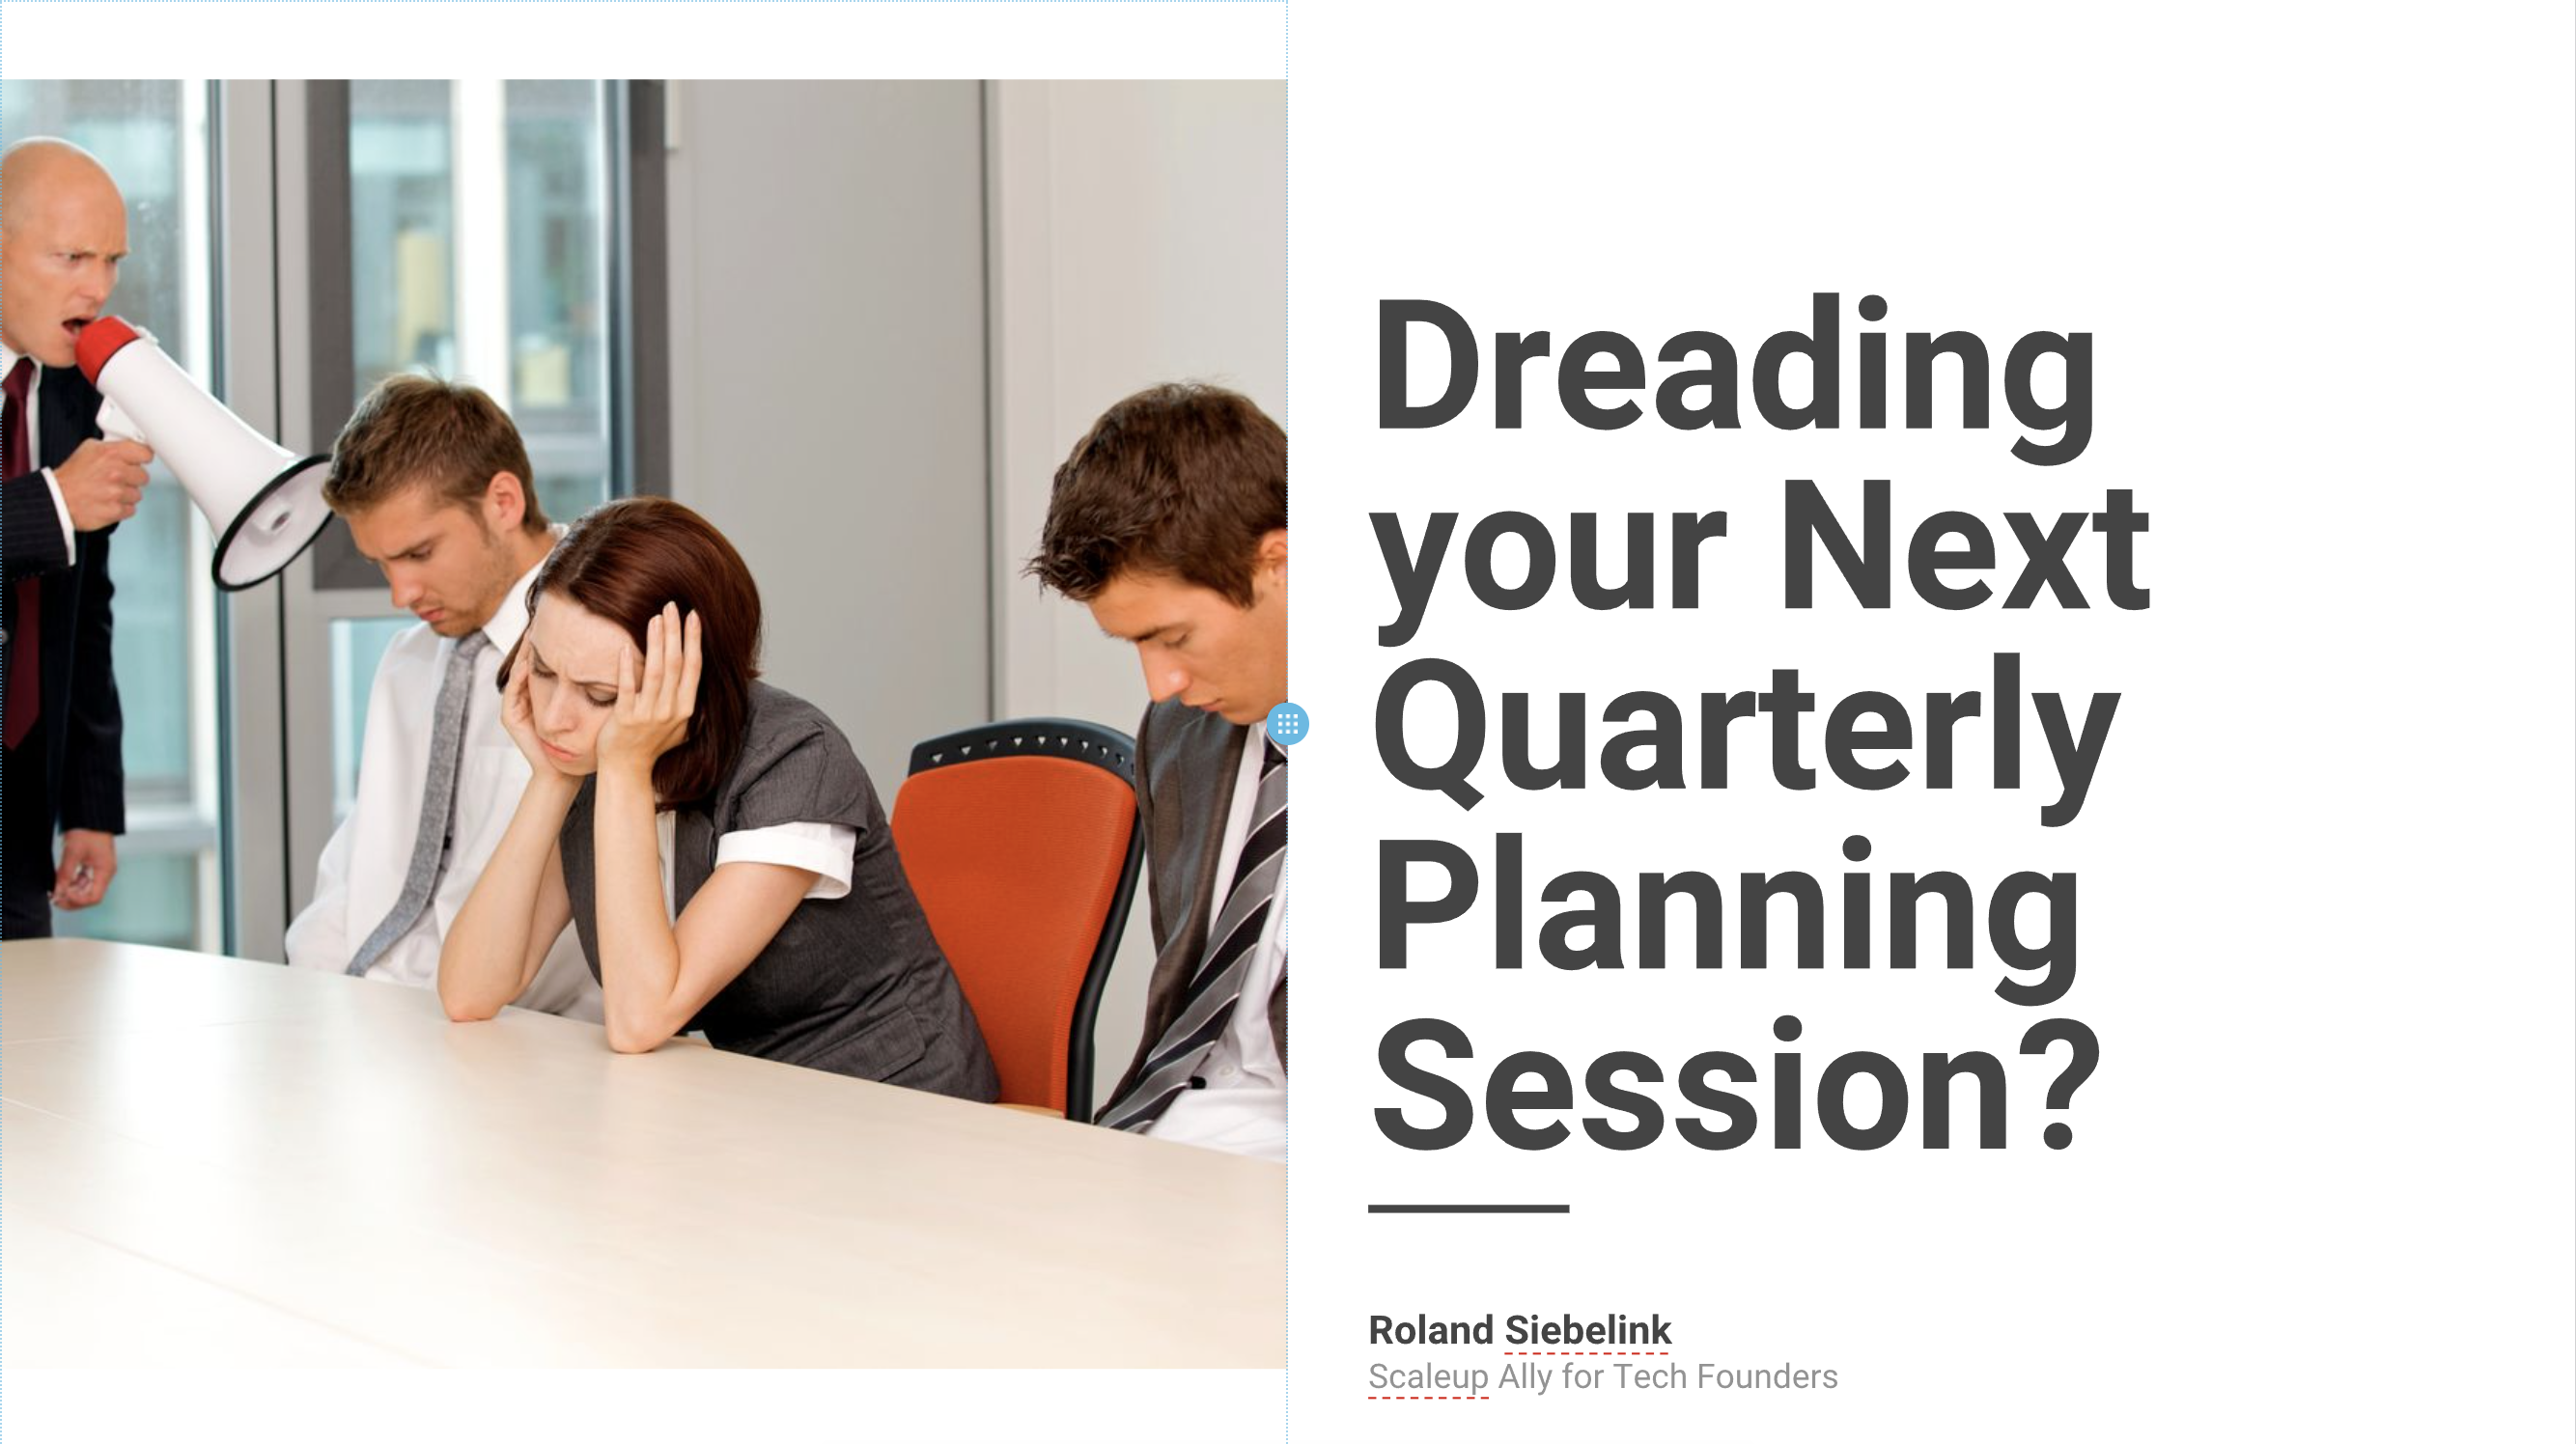 Revitalize Your Quarterly Planning Effective Strategies to Re-Energize, Re-Align, and Rebuild Trust